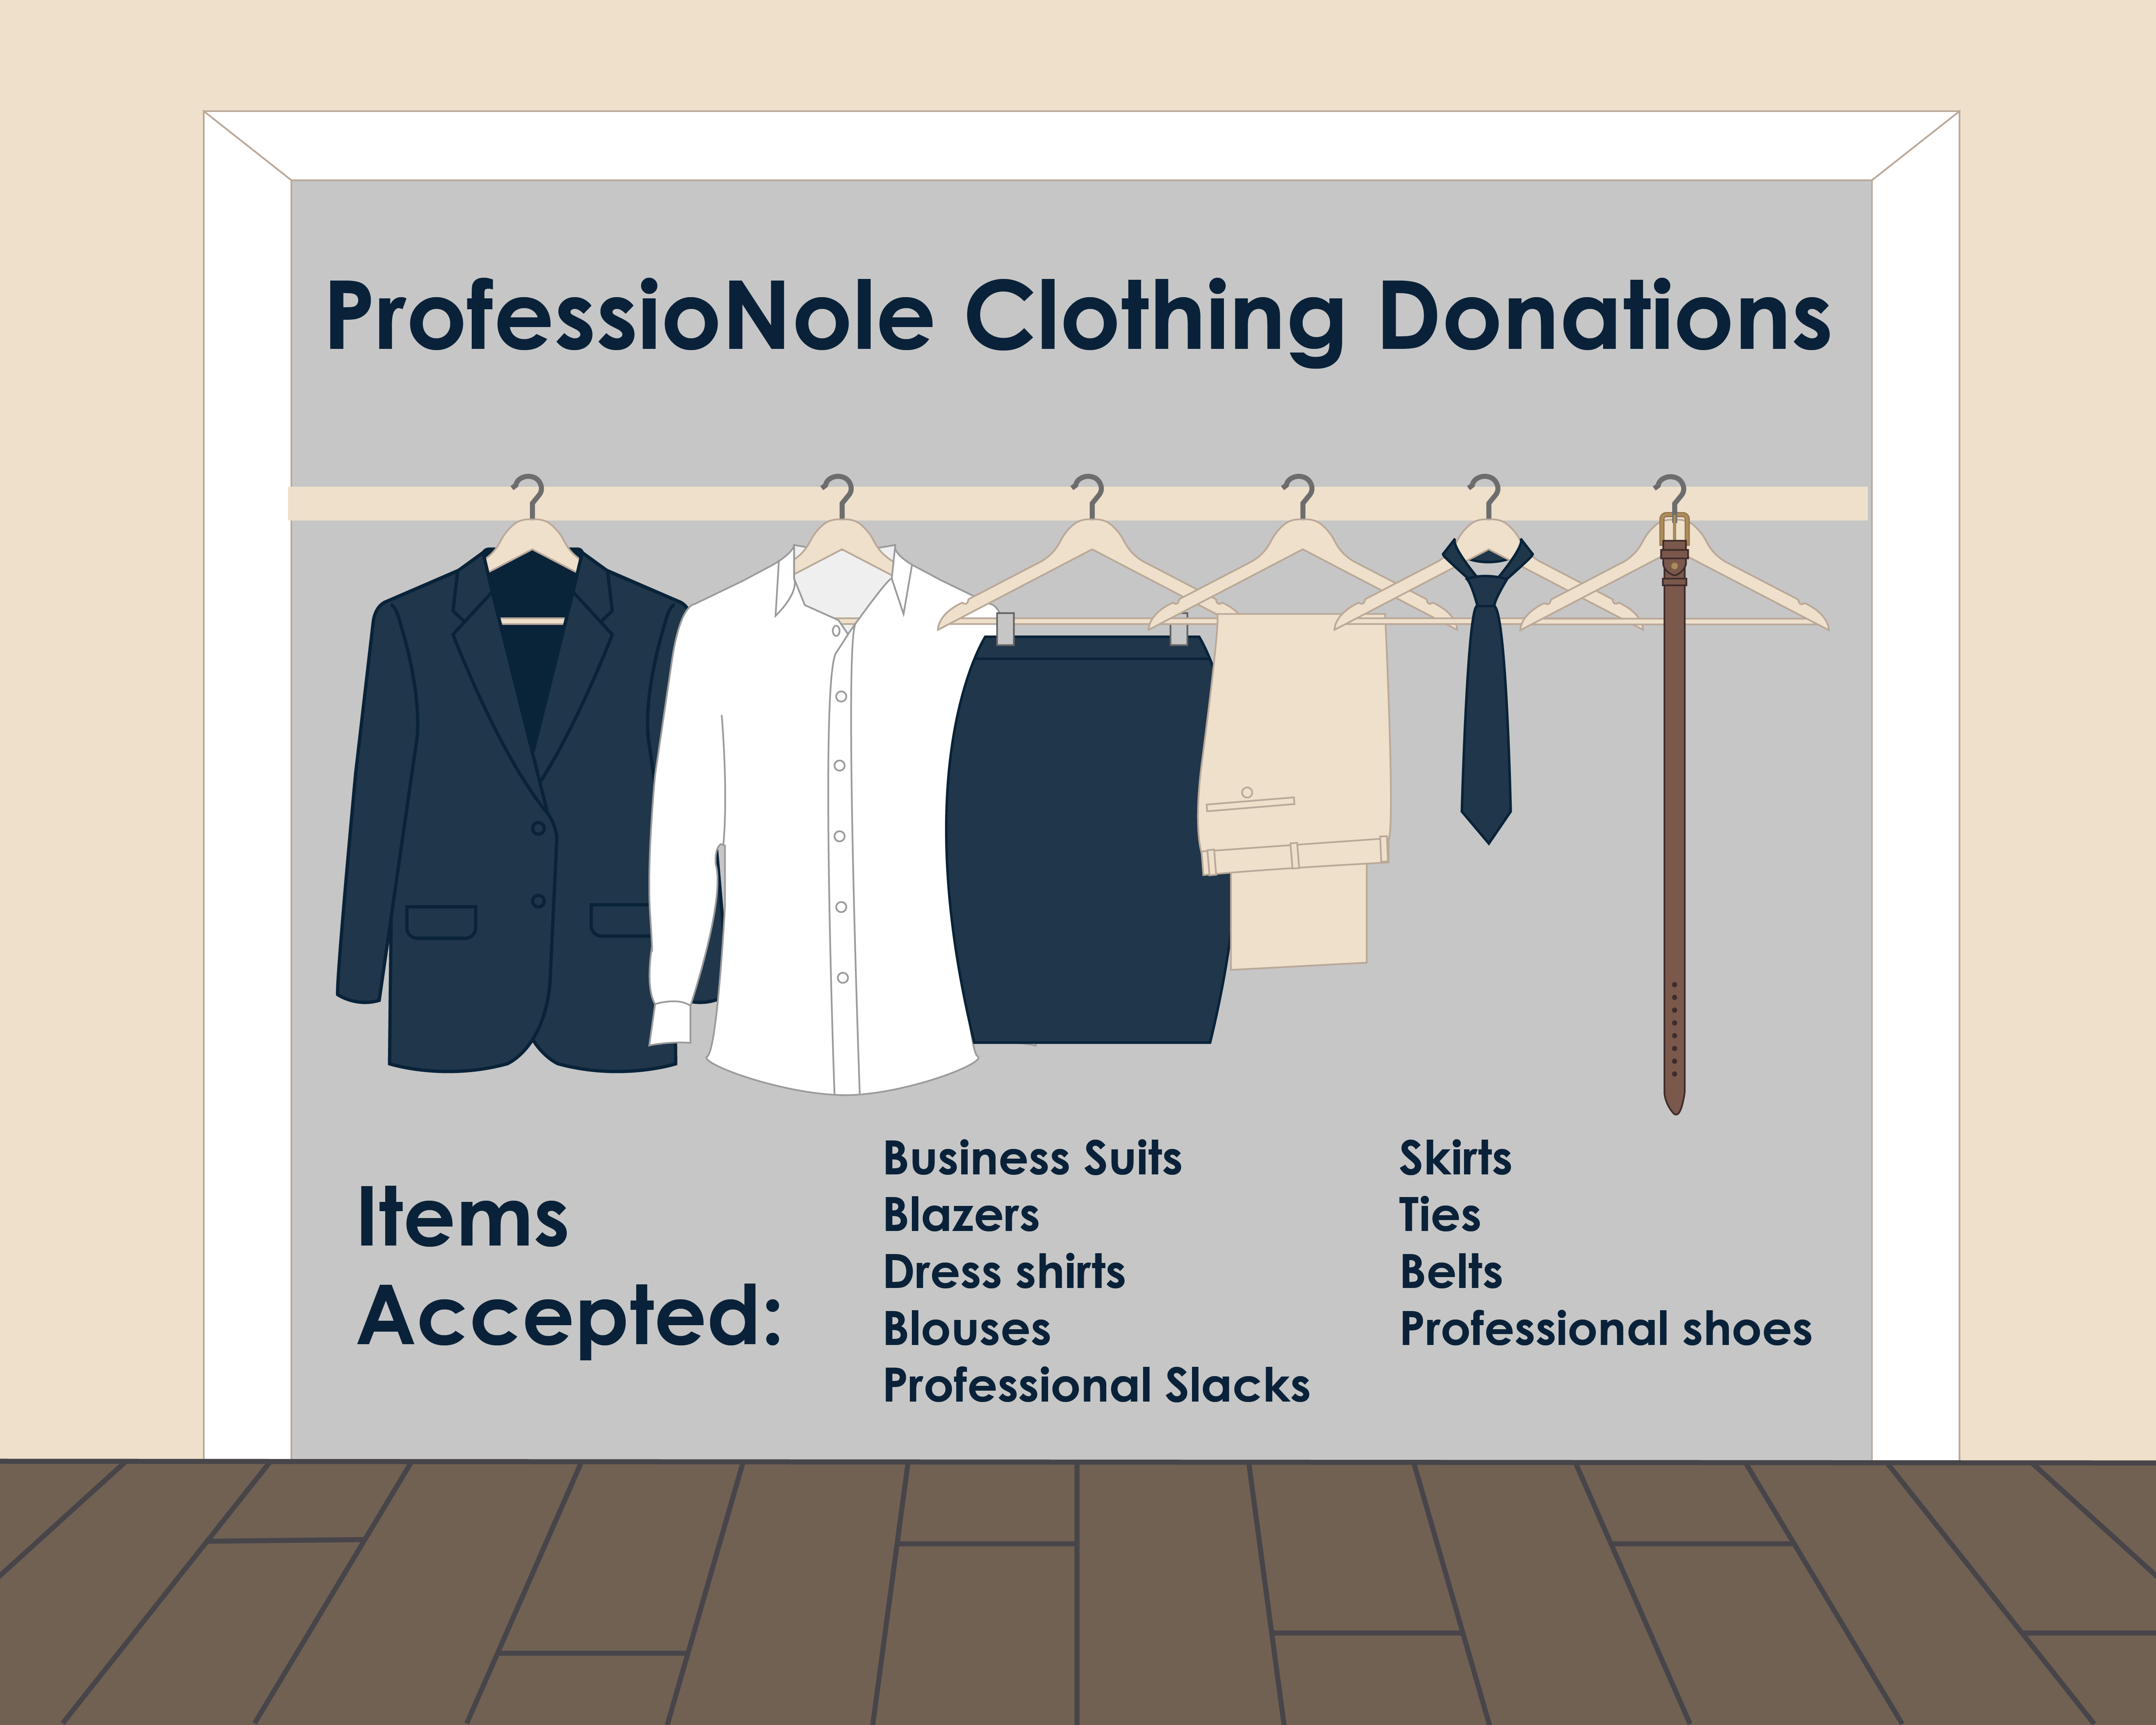 Examples of professional clothing students can donate include:  business suits, blazers, dress shirts, blouses, professional slacks, skirts, ties, belts, professional shoes.